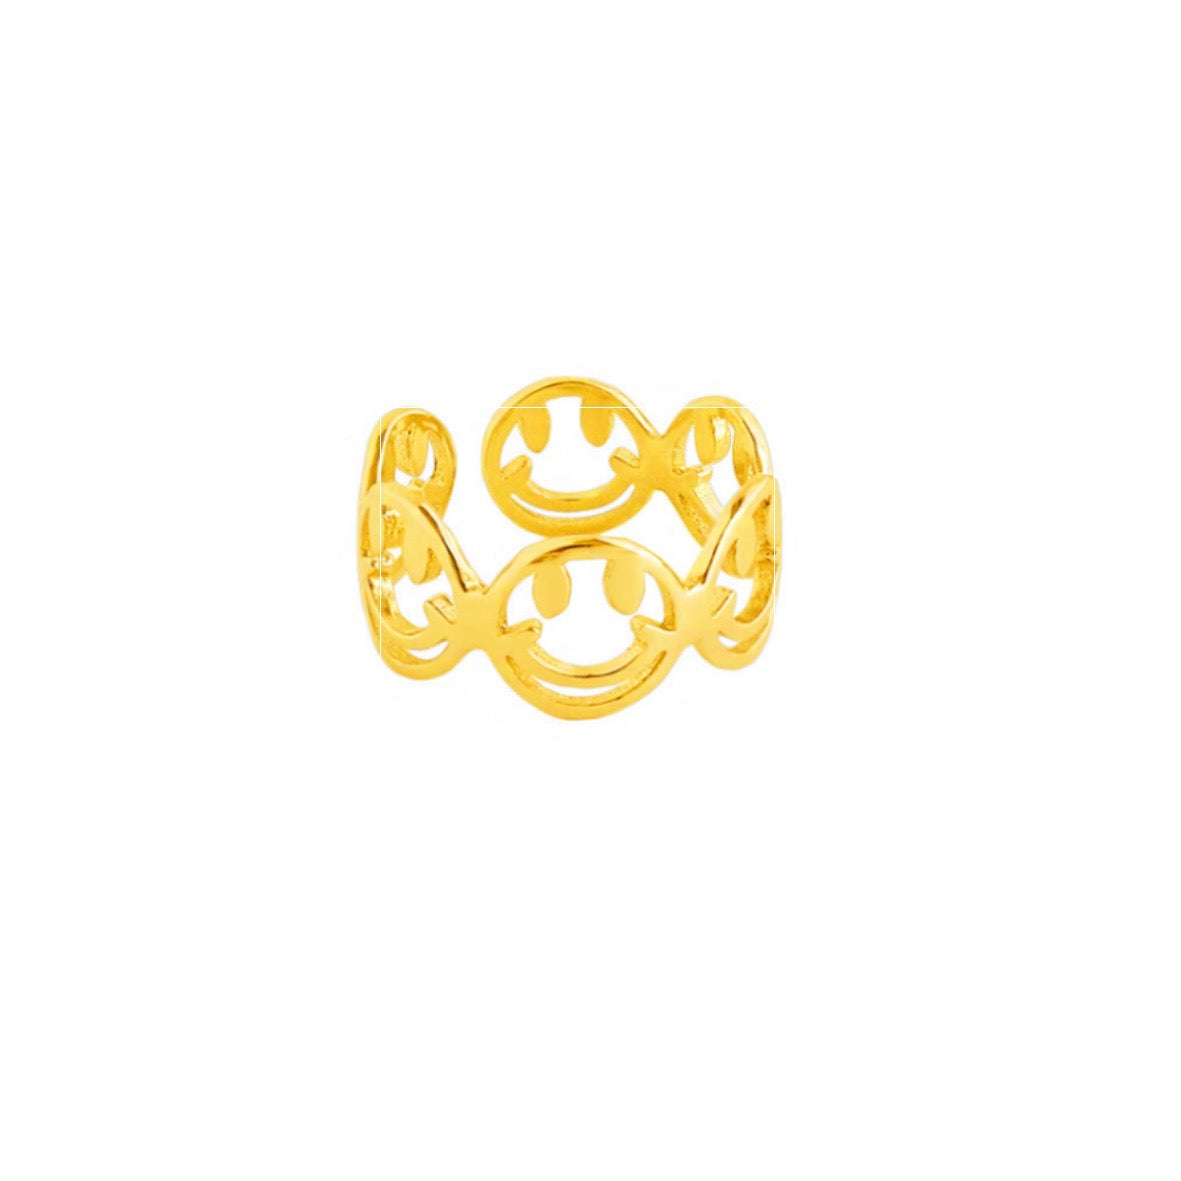 SMILE FACE BAND ring